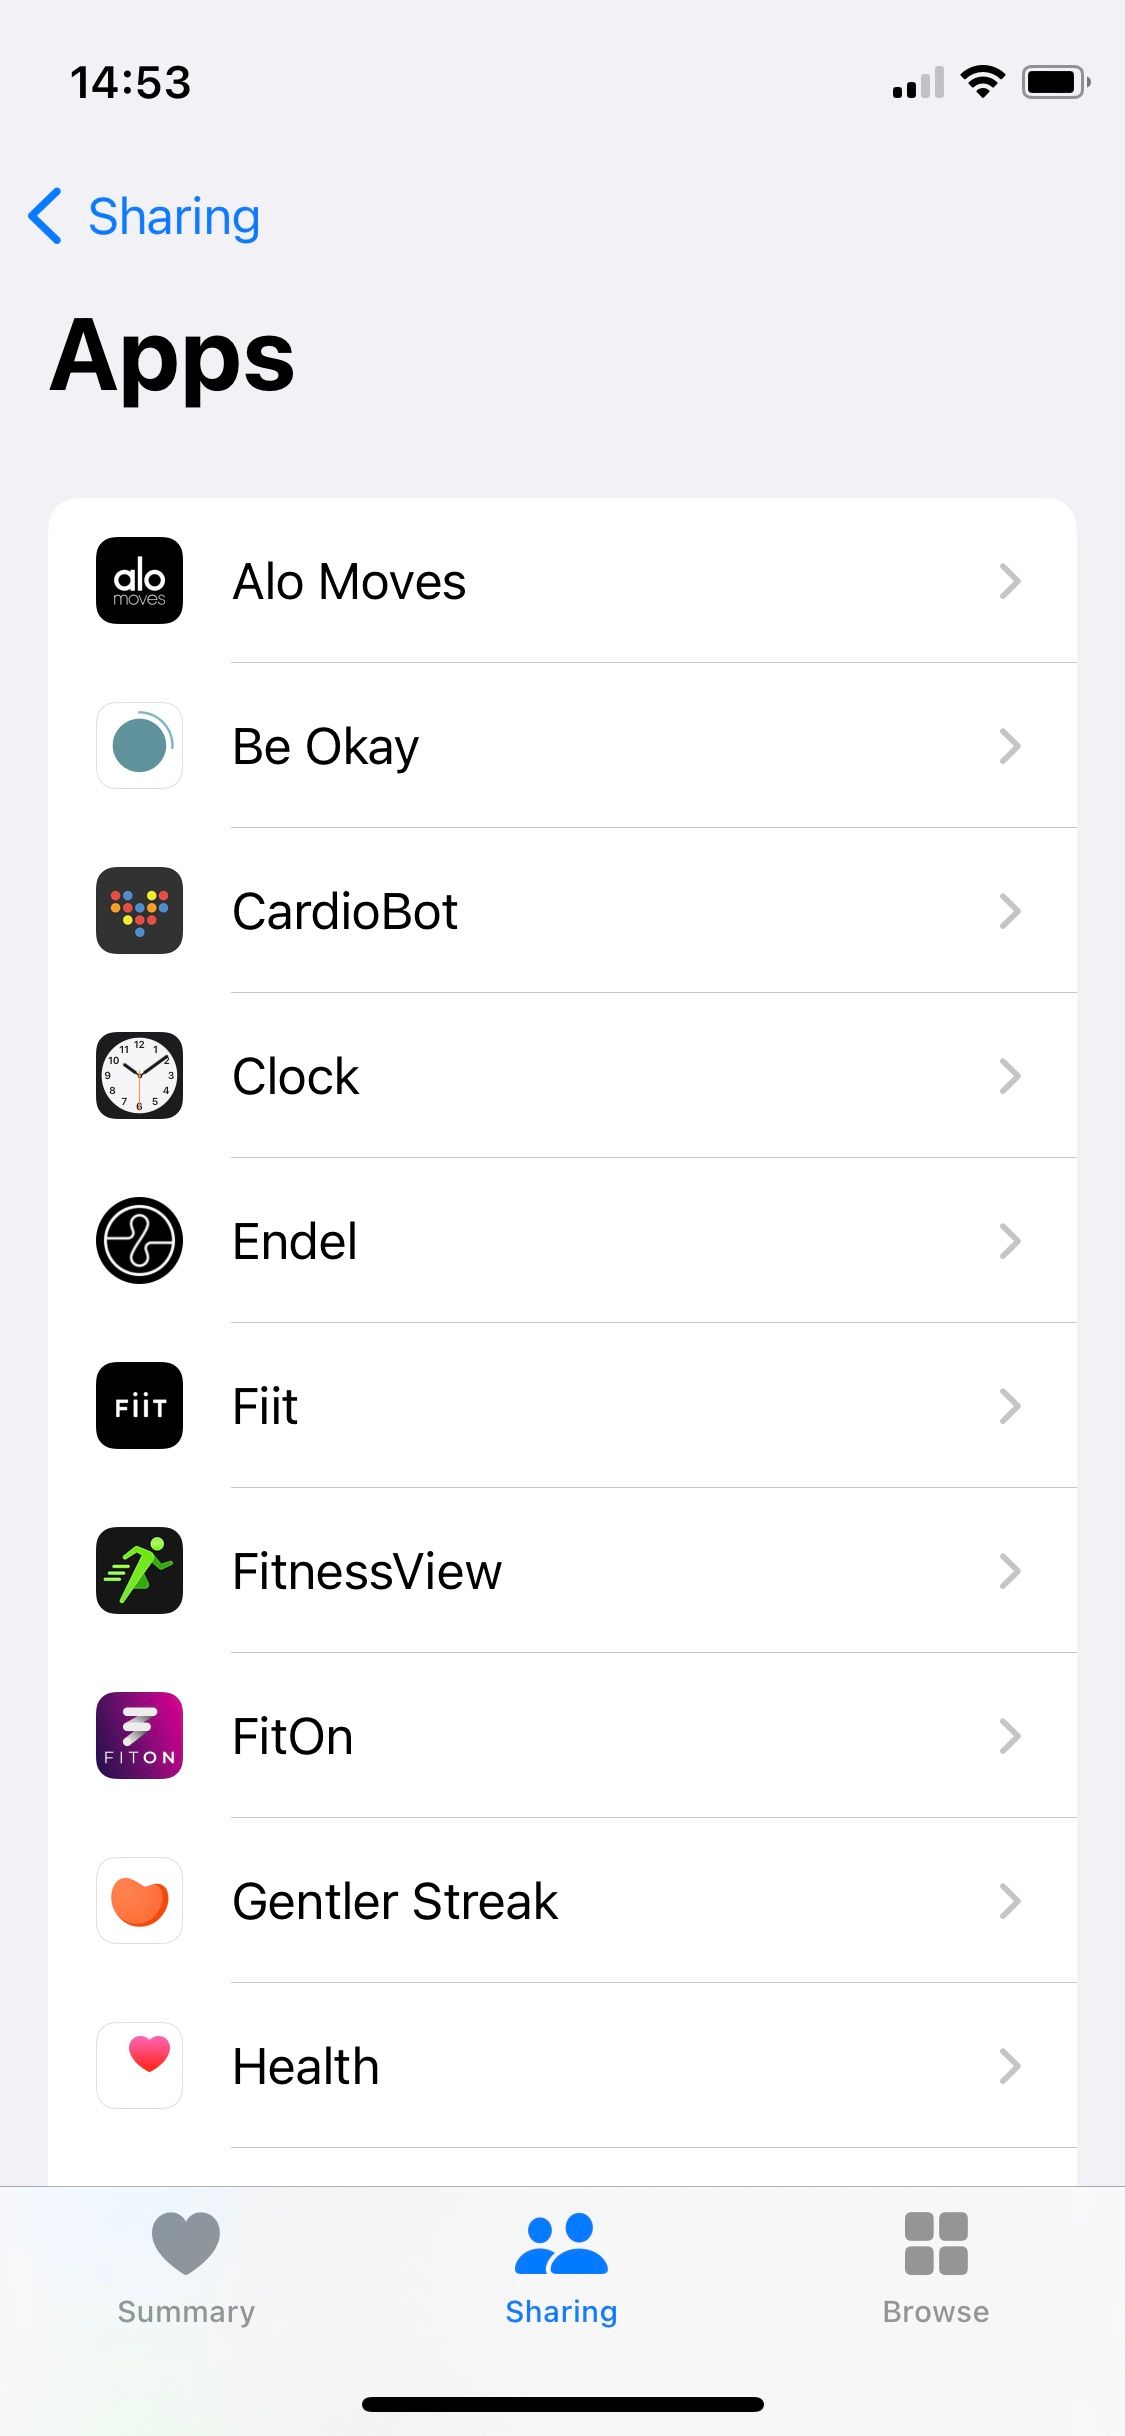 Screenshot of Apple Health Sharing screen showing list of apps